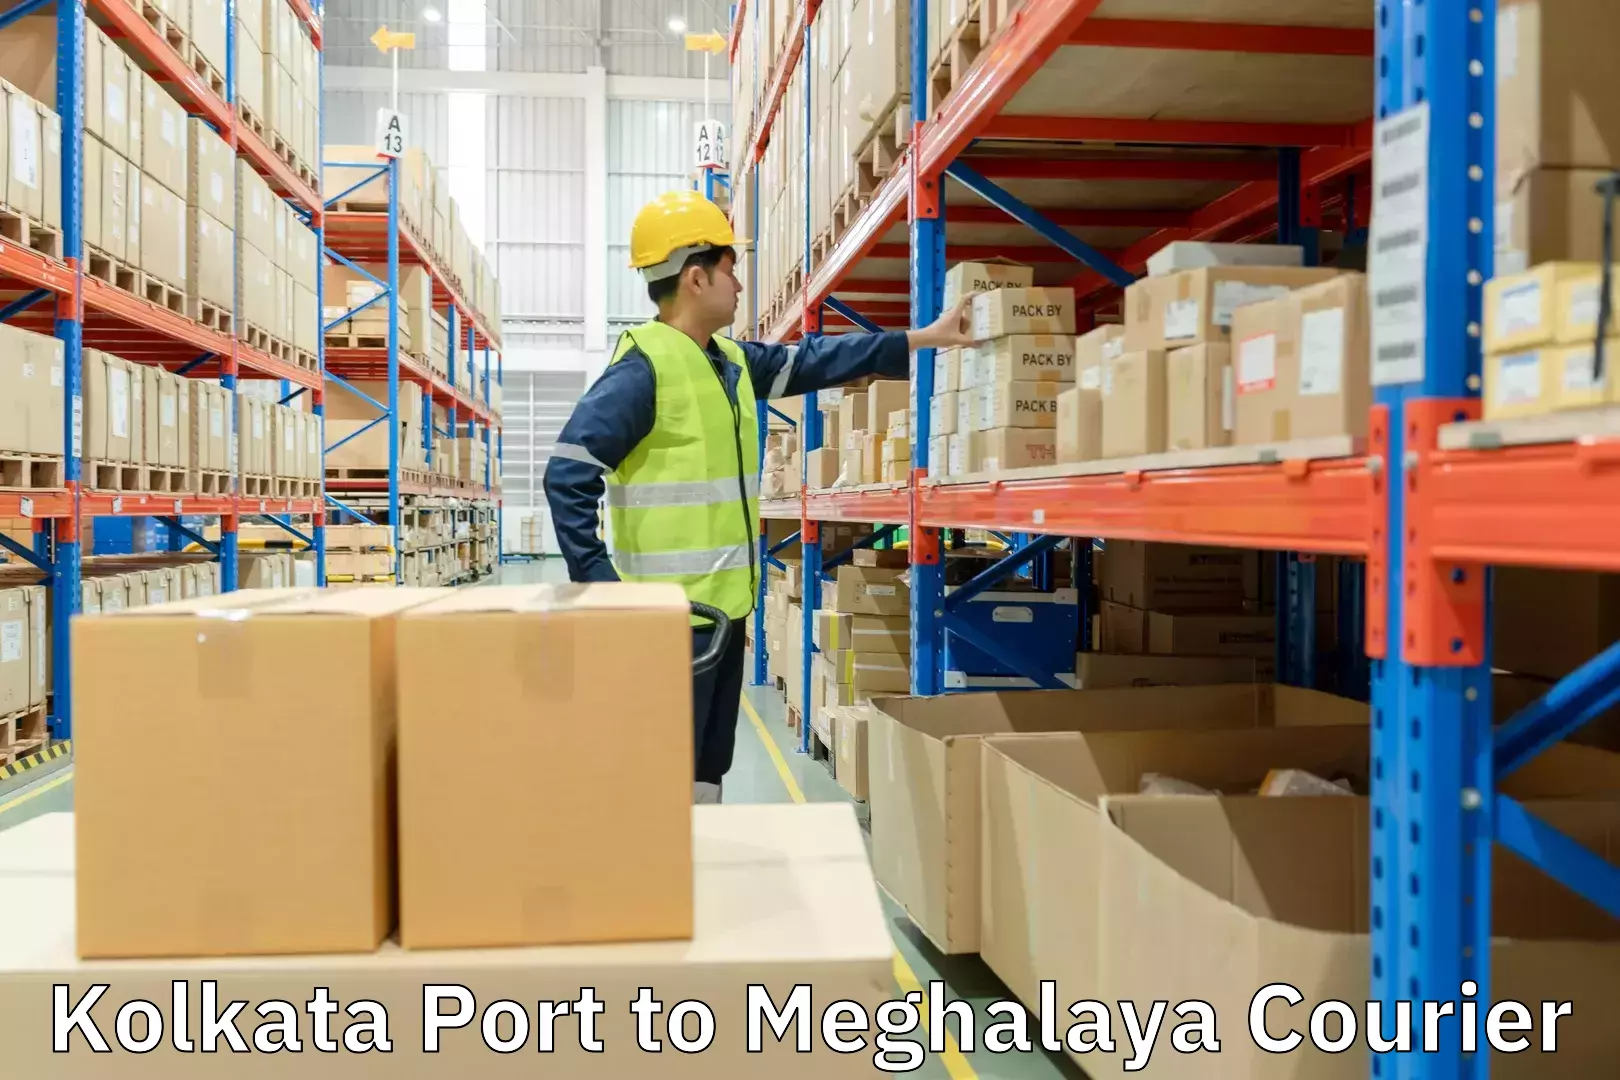 Personal parcel delivery Kolkata Port to Tura